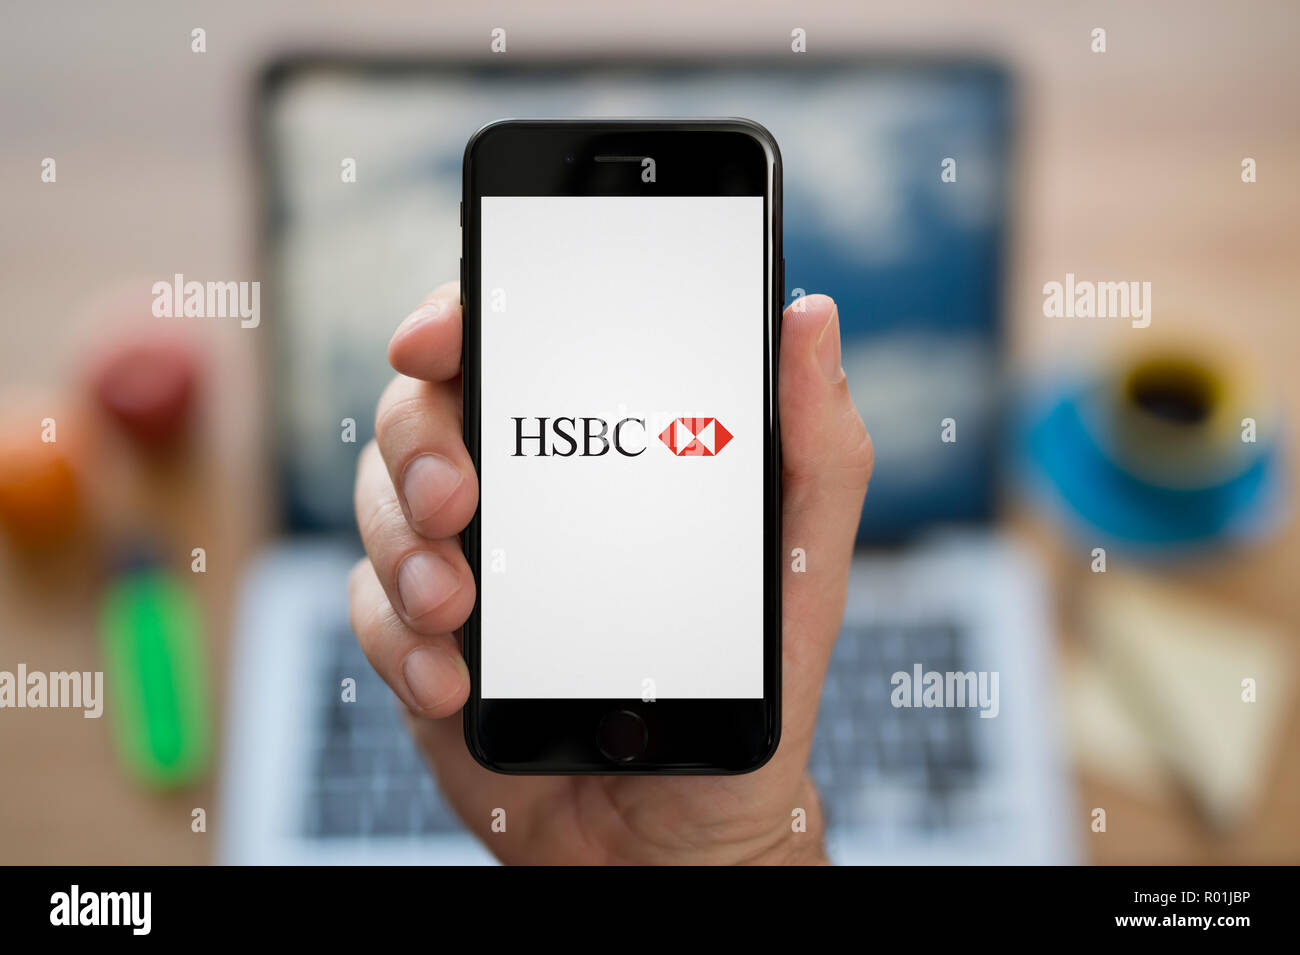 A man looks at his iPhone which displays the HSBC logo, while sat at his computer desk (Editorial use only). Stock Photo